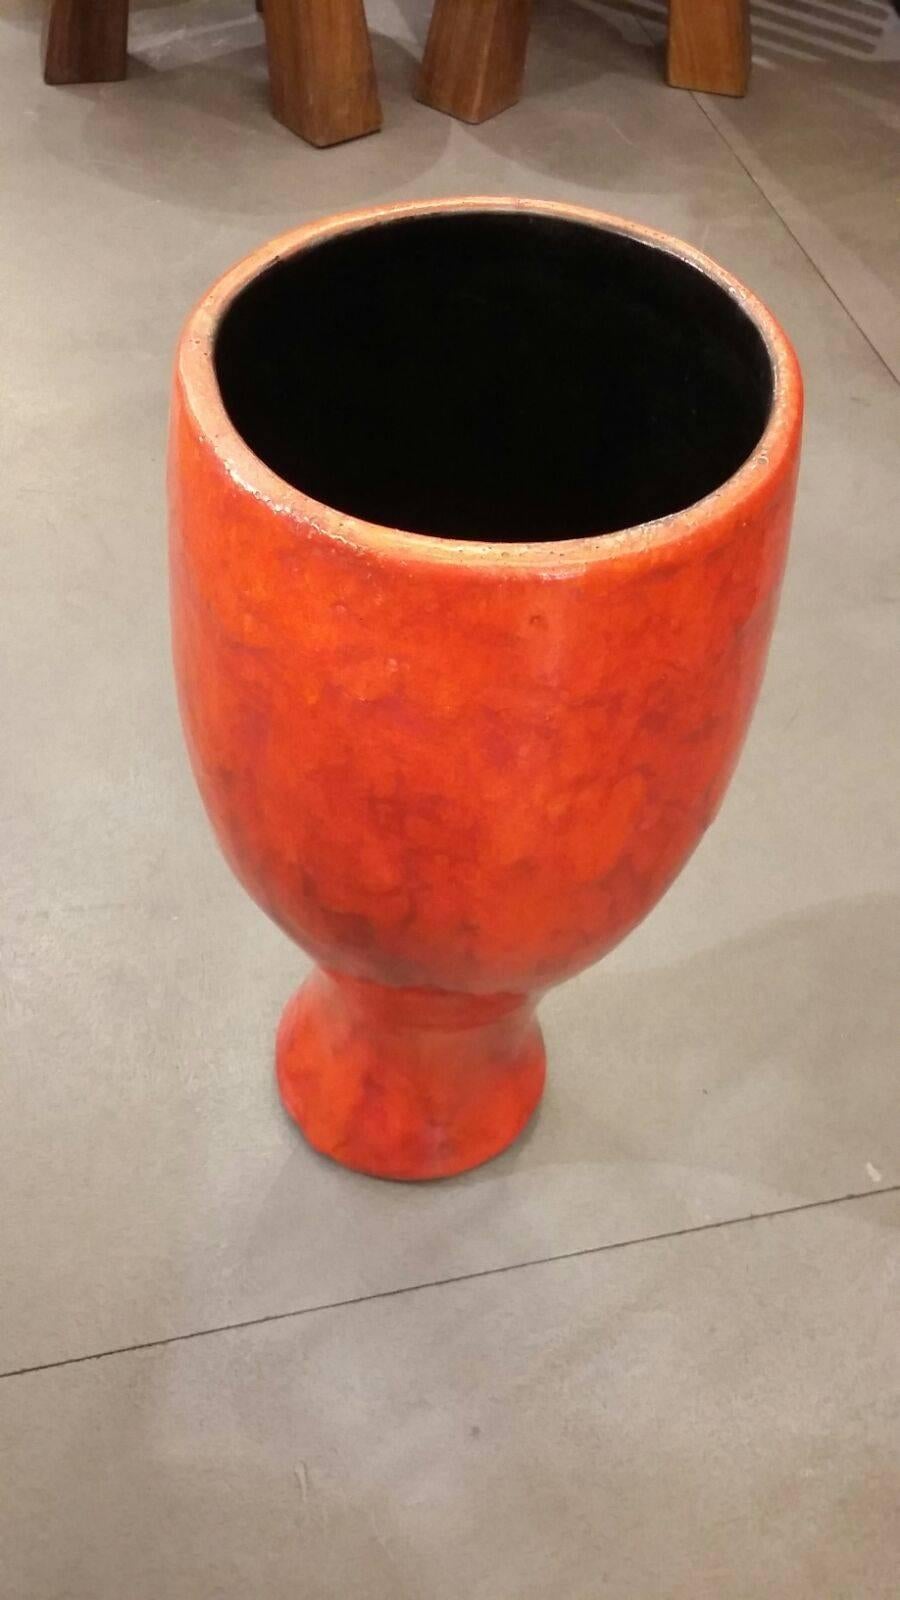 Beautiful Cloutier Frères ceramic vase circa 1970, signed, in excellent condition.